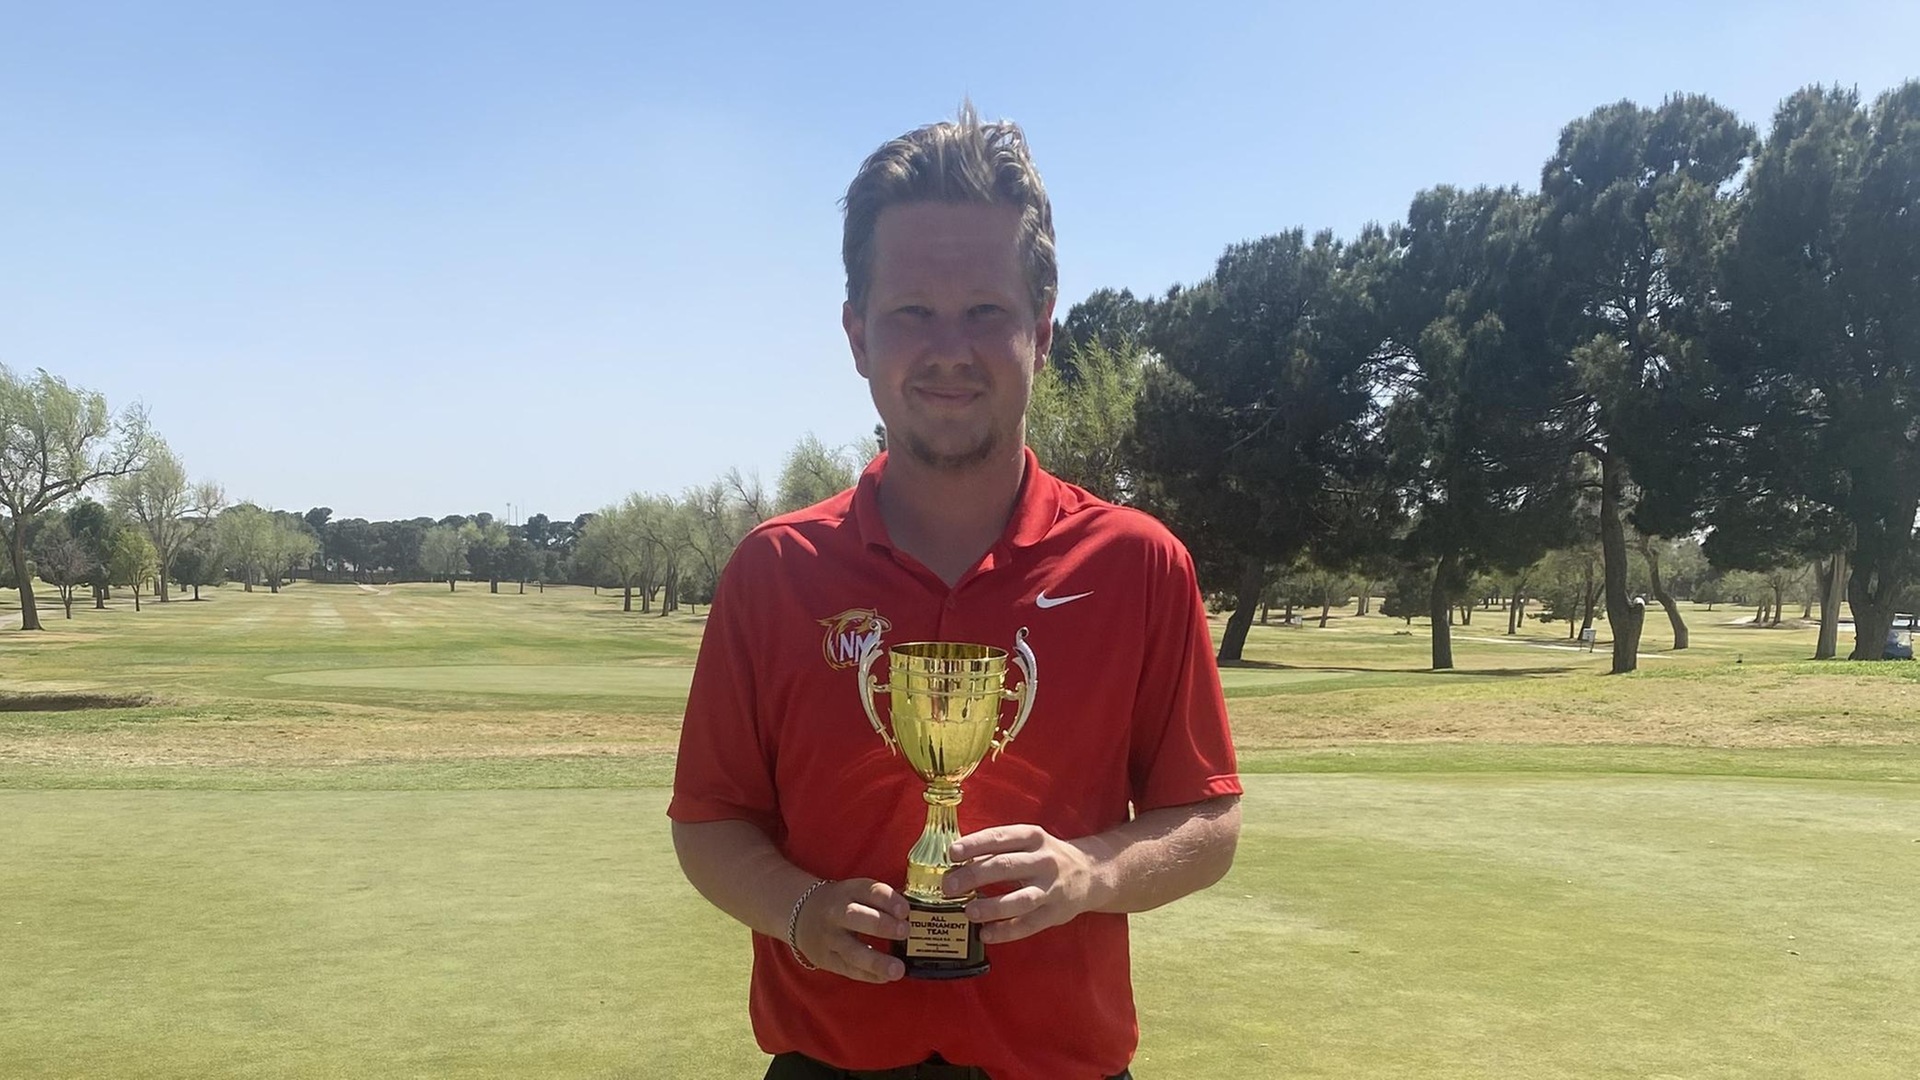 Pettersson Wins 2nd Spring Title, T-Bird (M-Golf) Places 3rd in Midland